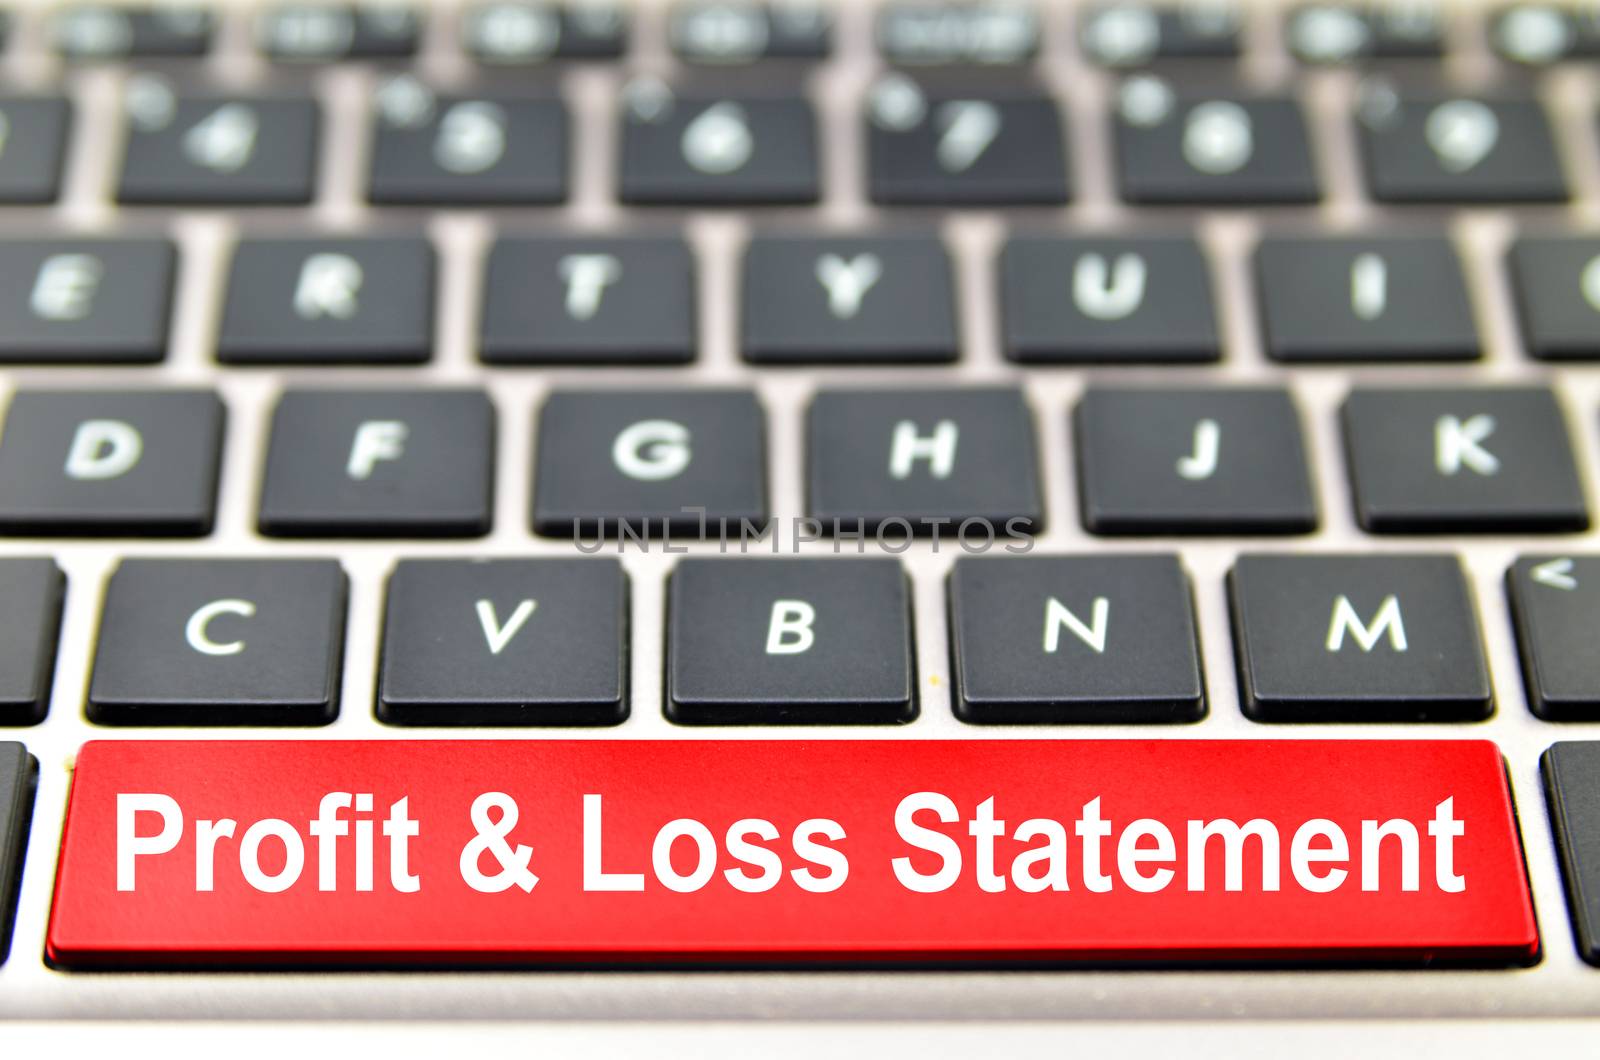 Profit & Loss Statement word on computer space bar by tang90246